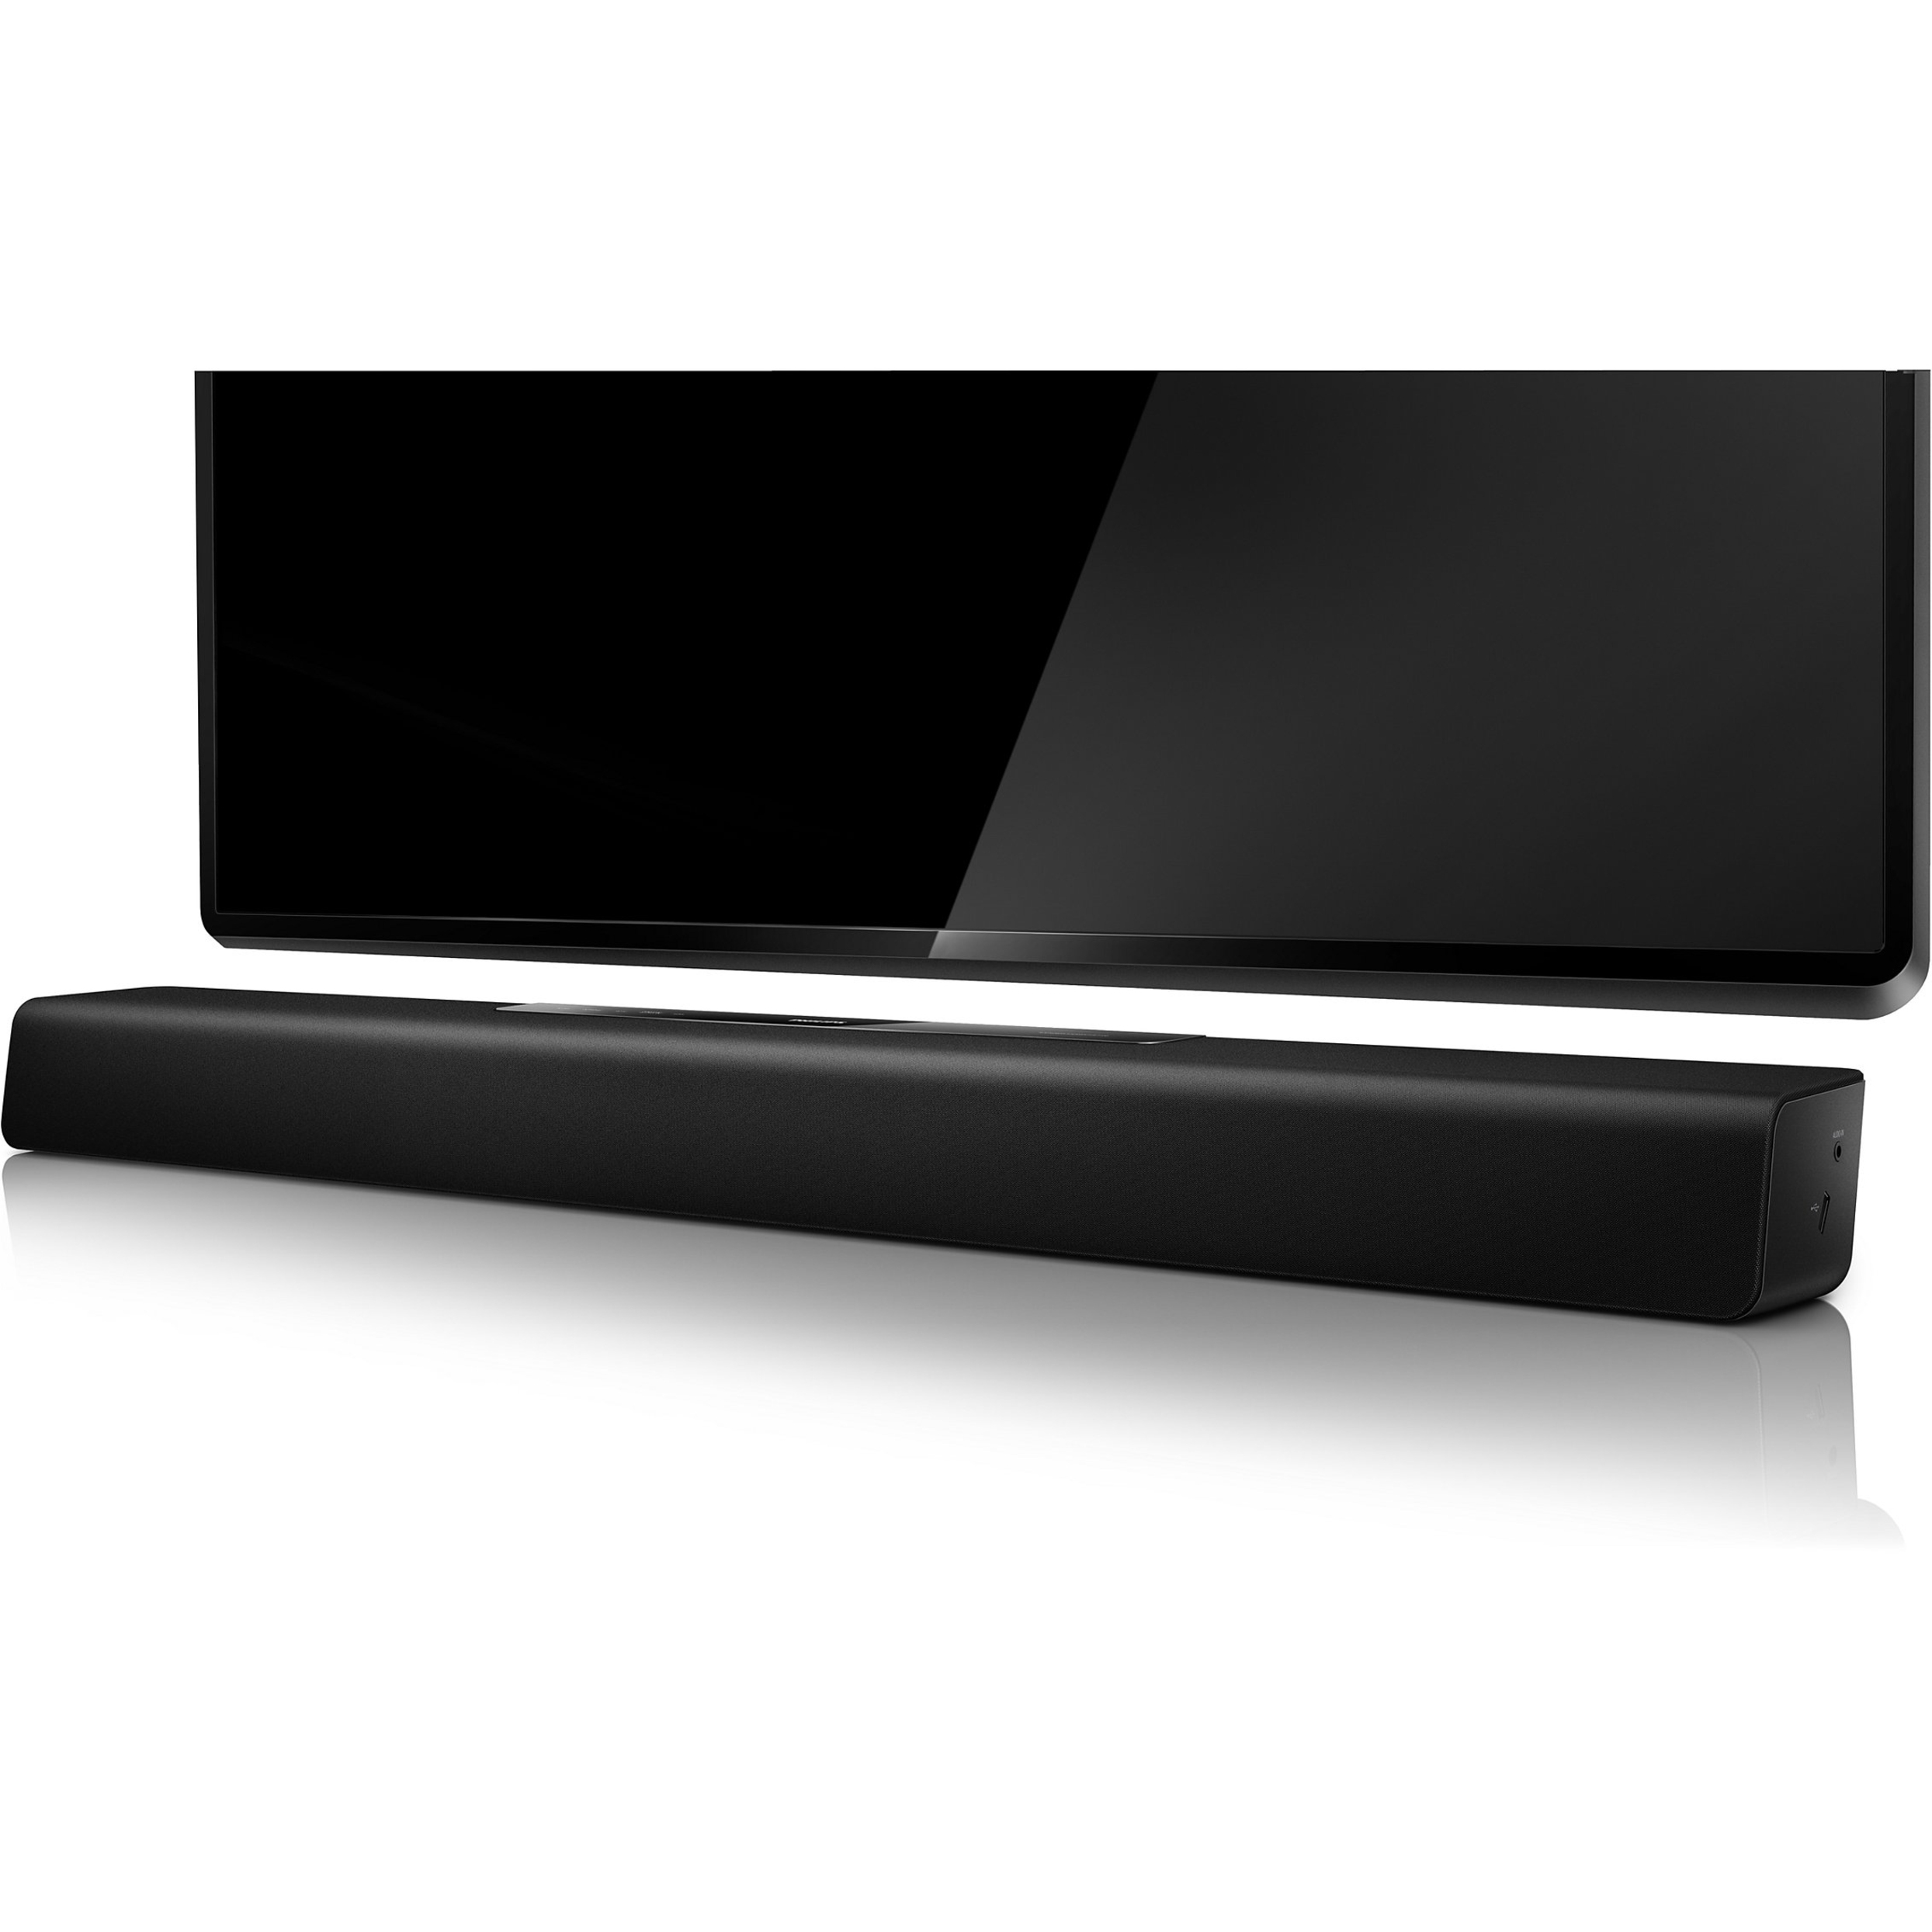 Philips HTL2101A - Sound bar - for home theater - 40 Watt (total) - image 2 of 4